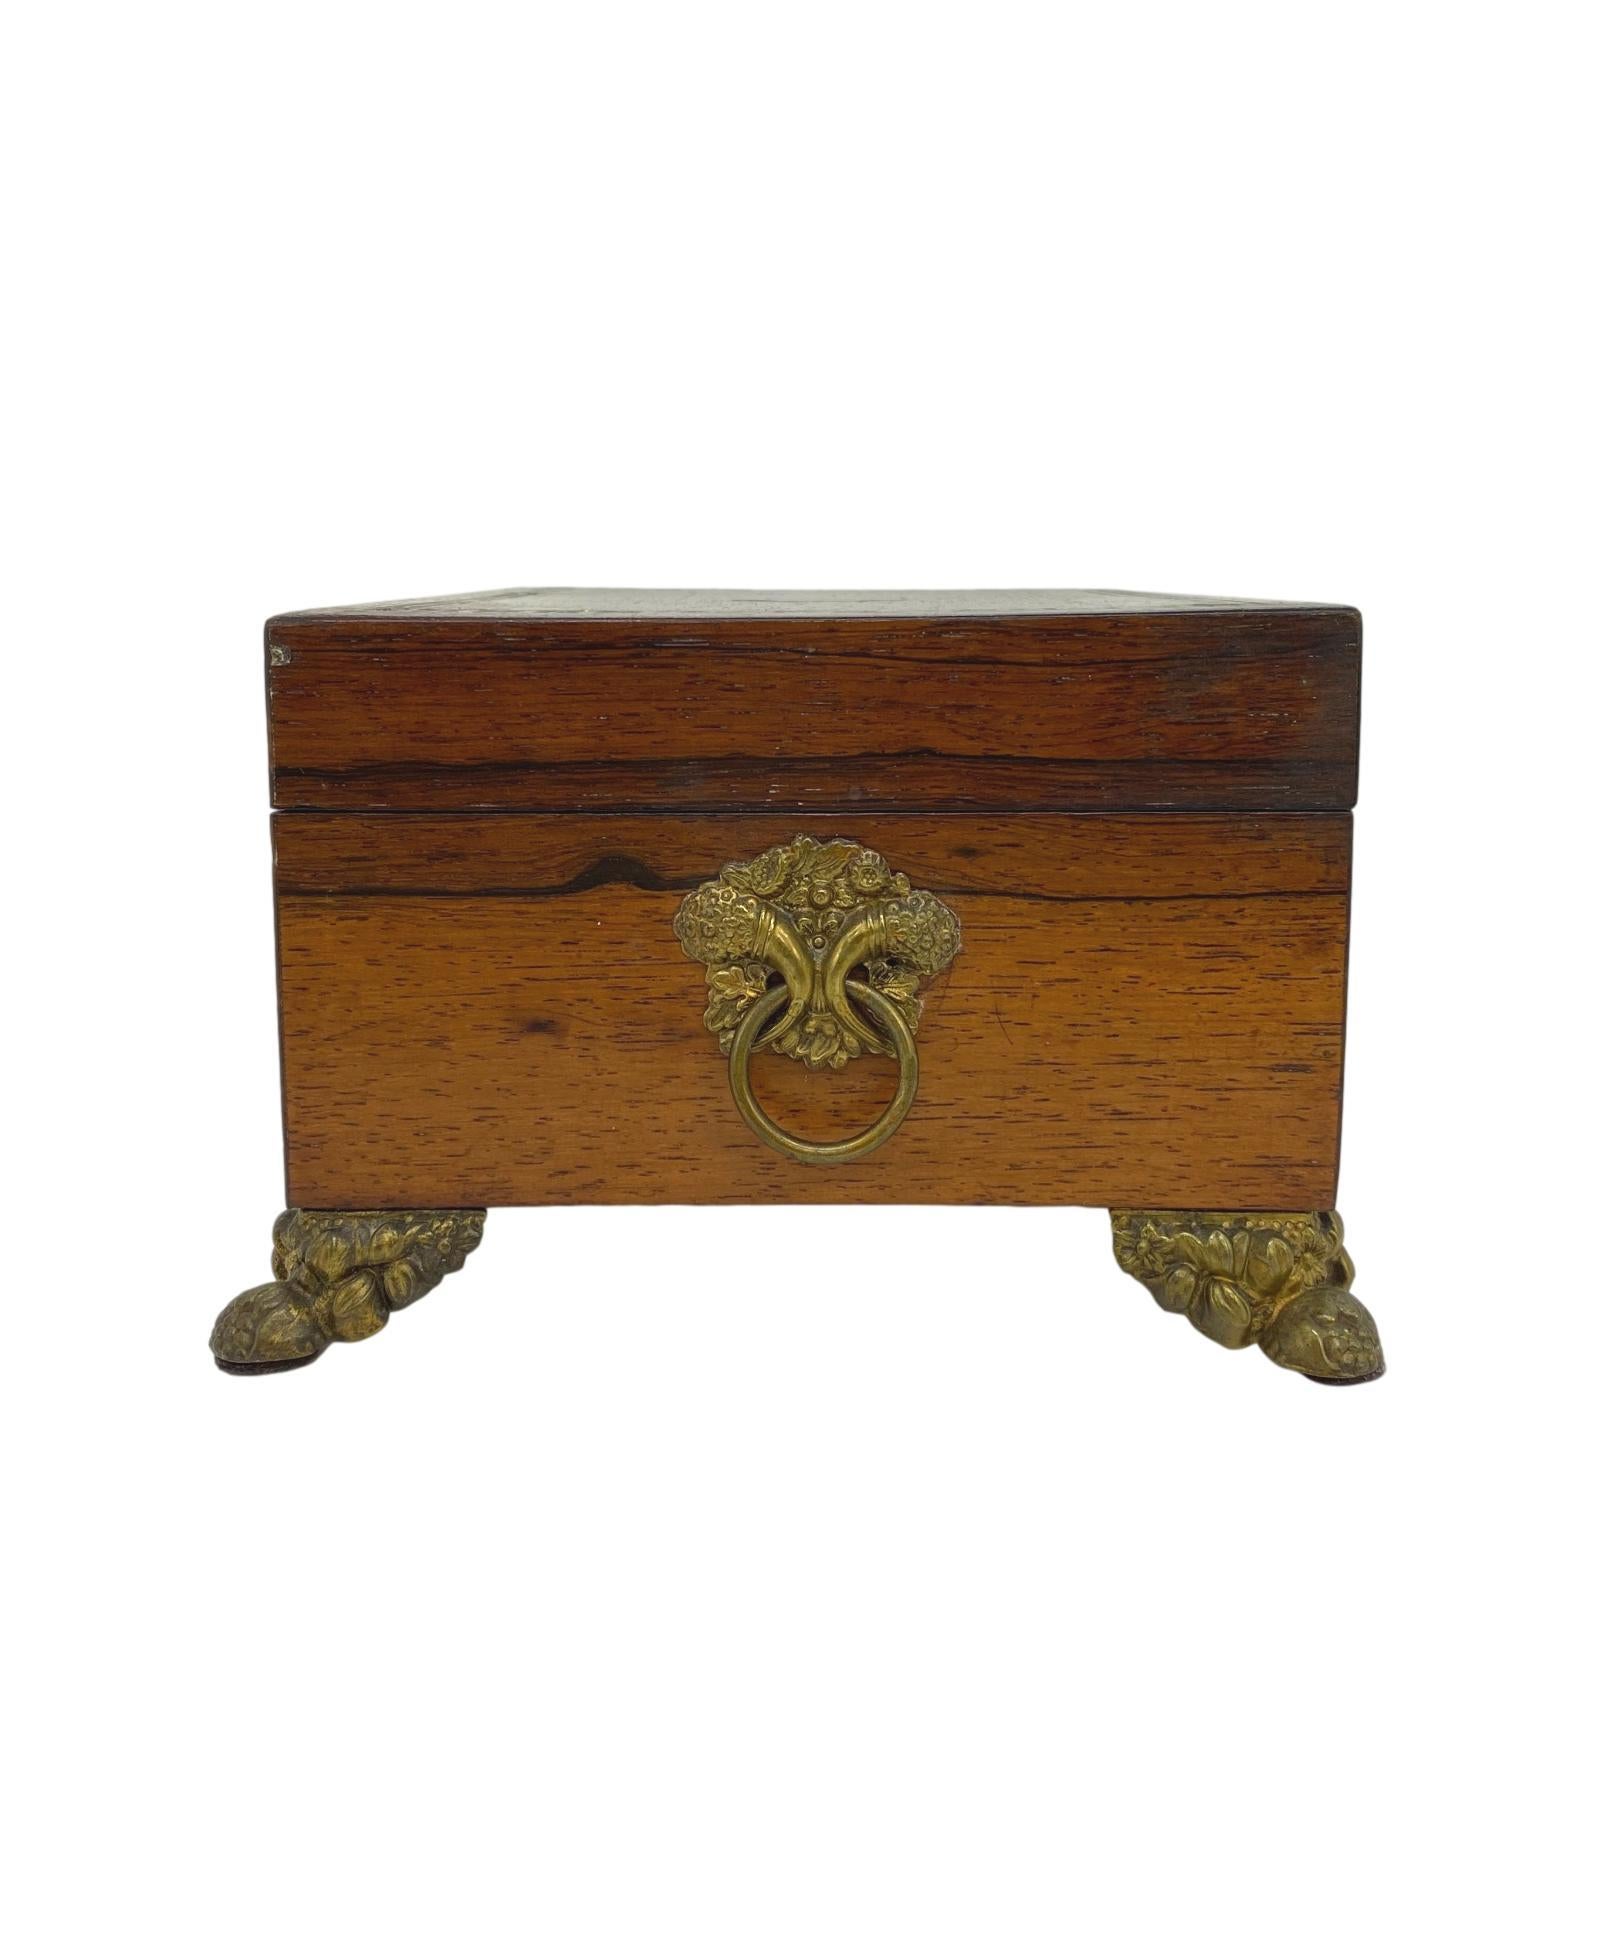 Antique Regency Box in Rosewood with Inlaid Ebony and Brass, English, circa 1820 For Sale 1